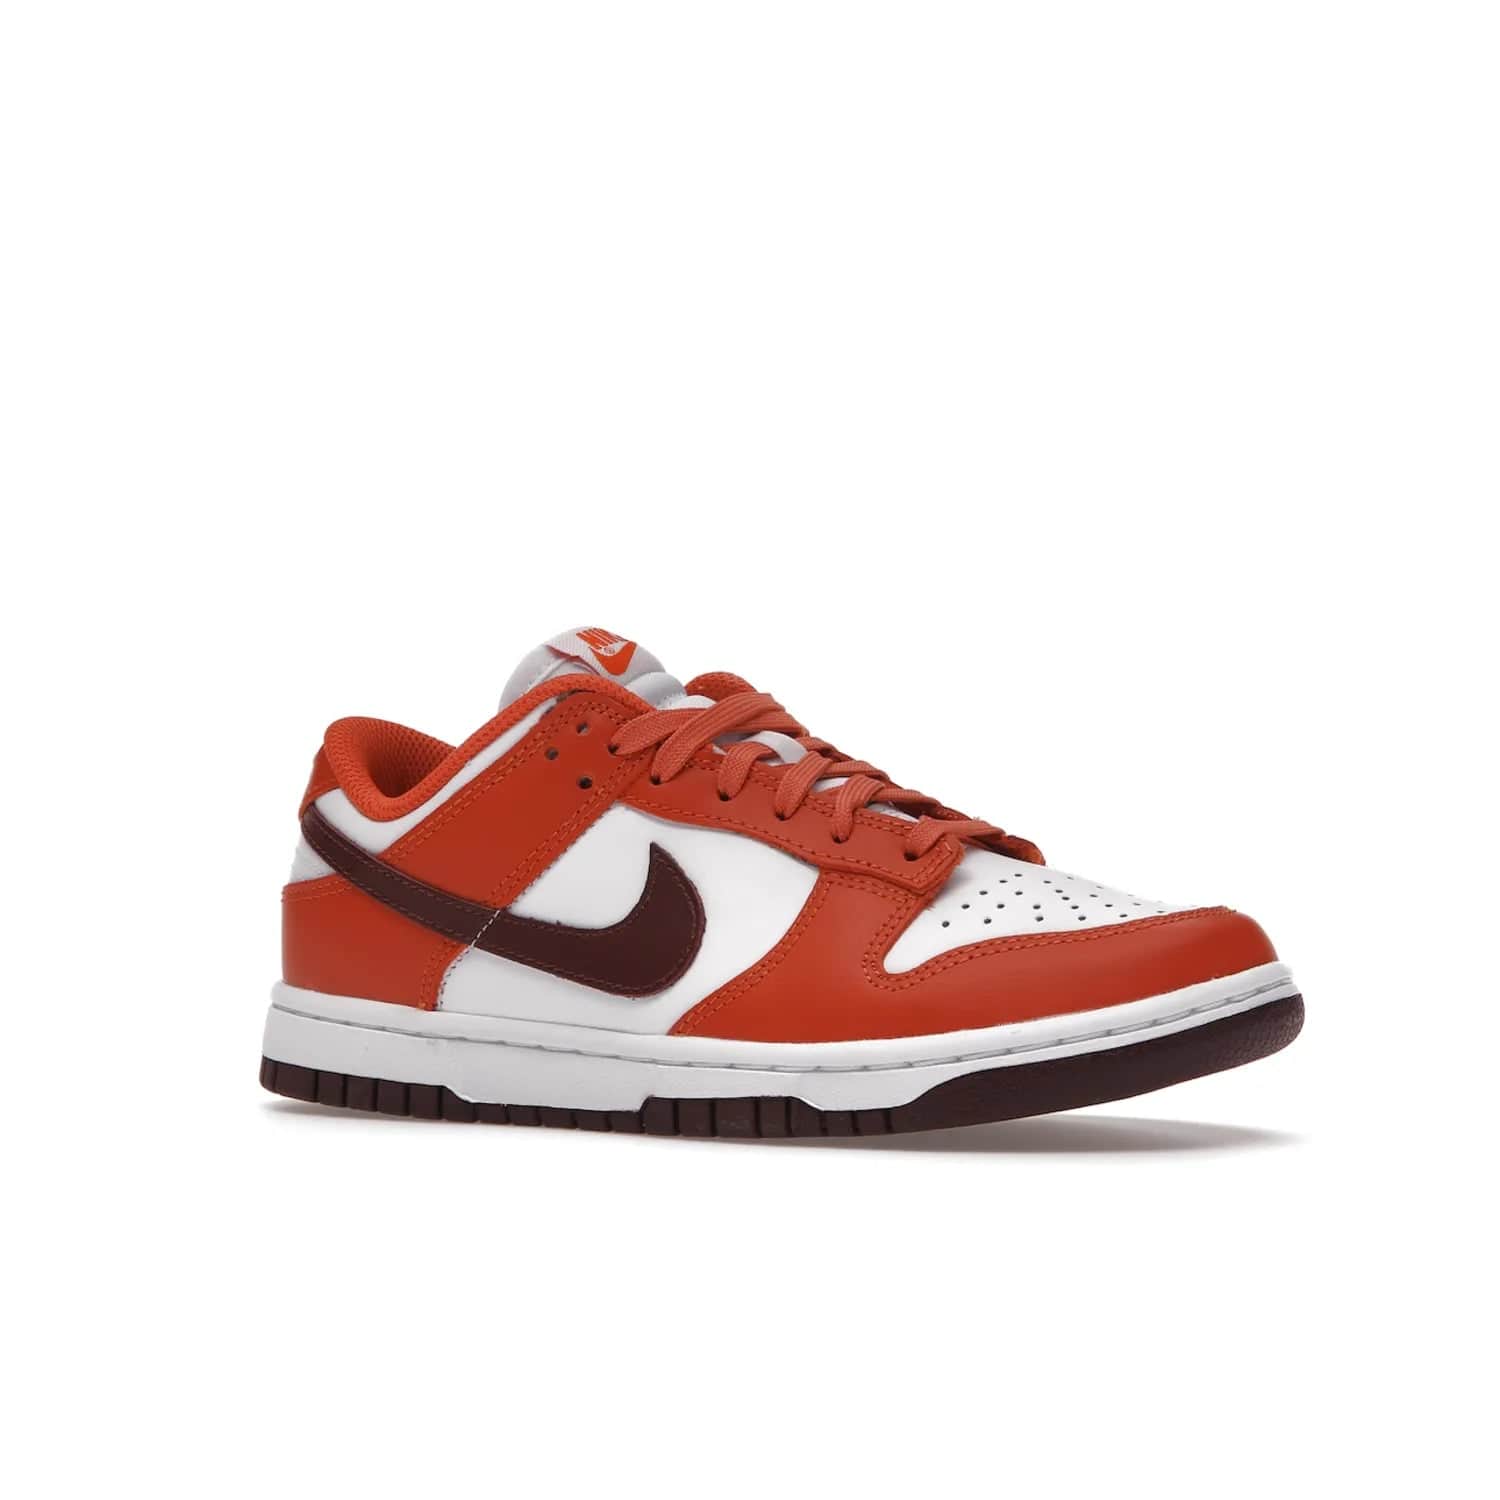 Nike Dunk Low Bronze Eclipse (Women's) - Image 4 - Only at www.BallersClubKickz.com - Elevate your style with the Women's Nike Dunk Low Bronze Eclipse! White leather upper, Mesa Orange overlays, Bronze Eclipse Swooshes, and matching soles designed for striking style. A modern statement piece to add to your wardrobe.